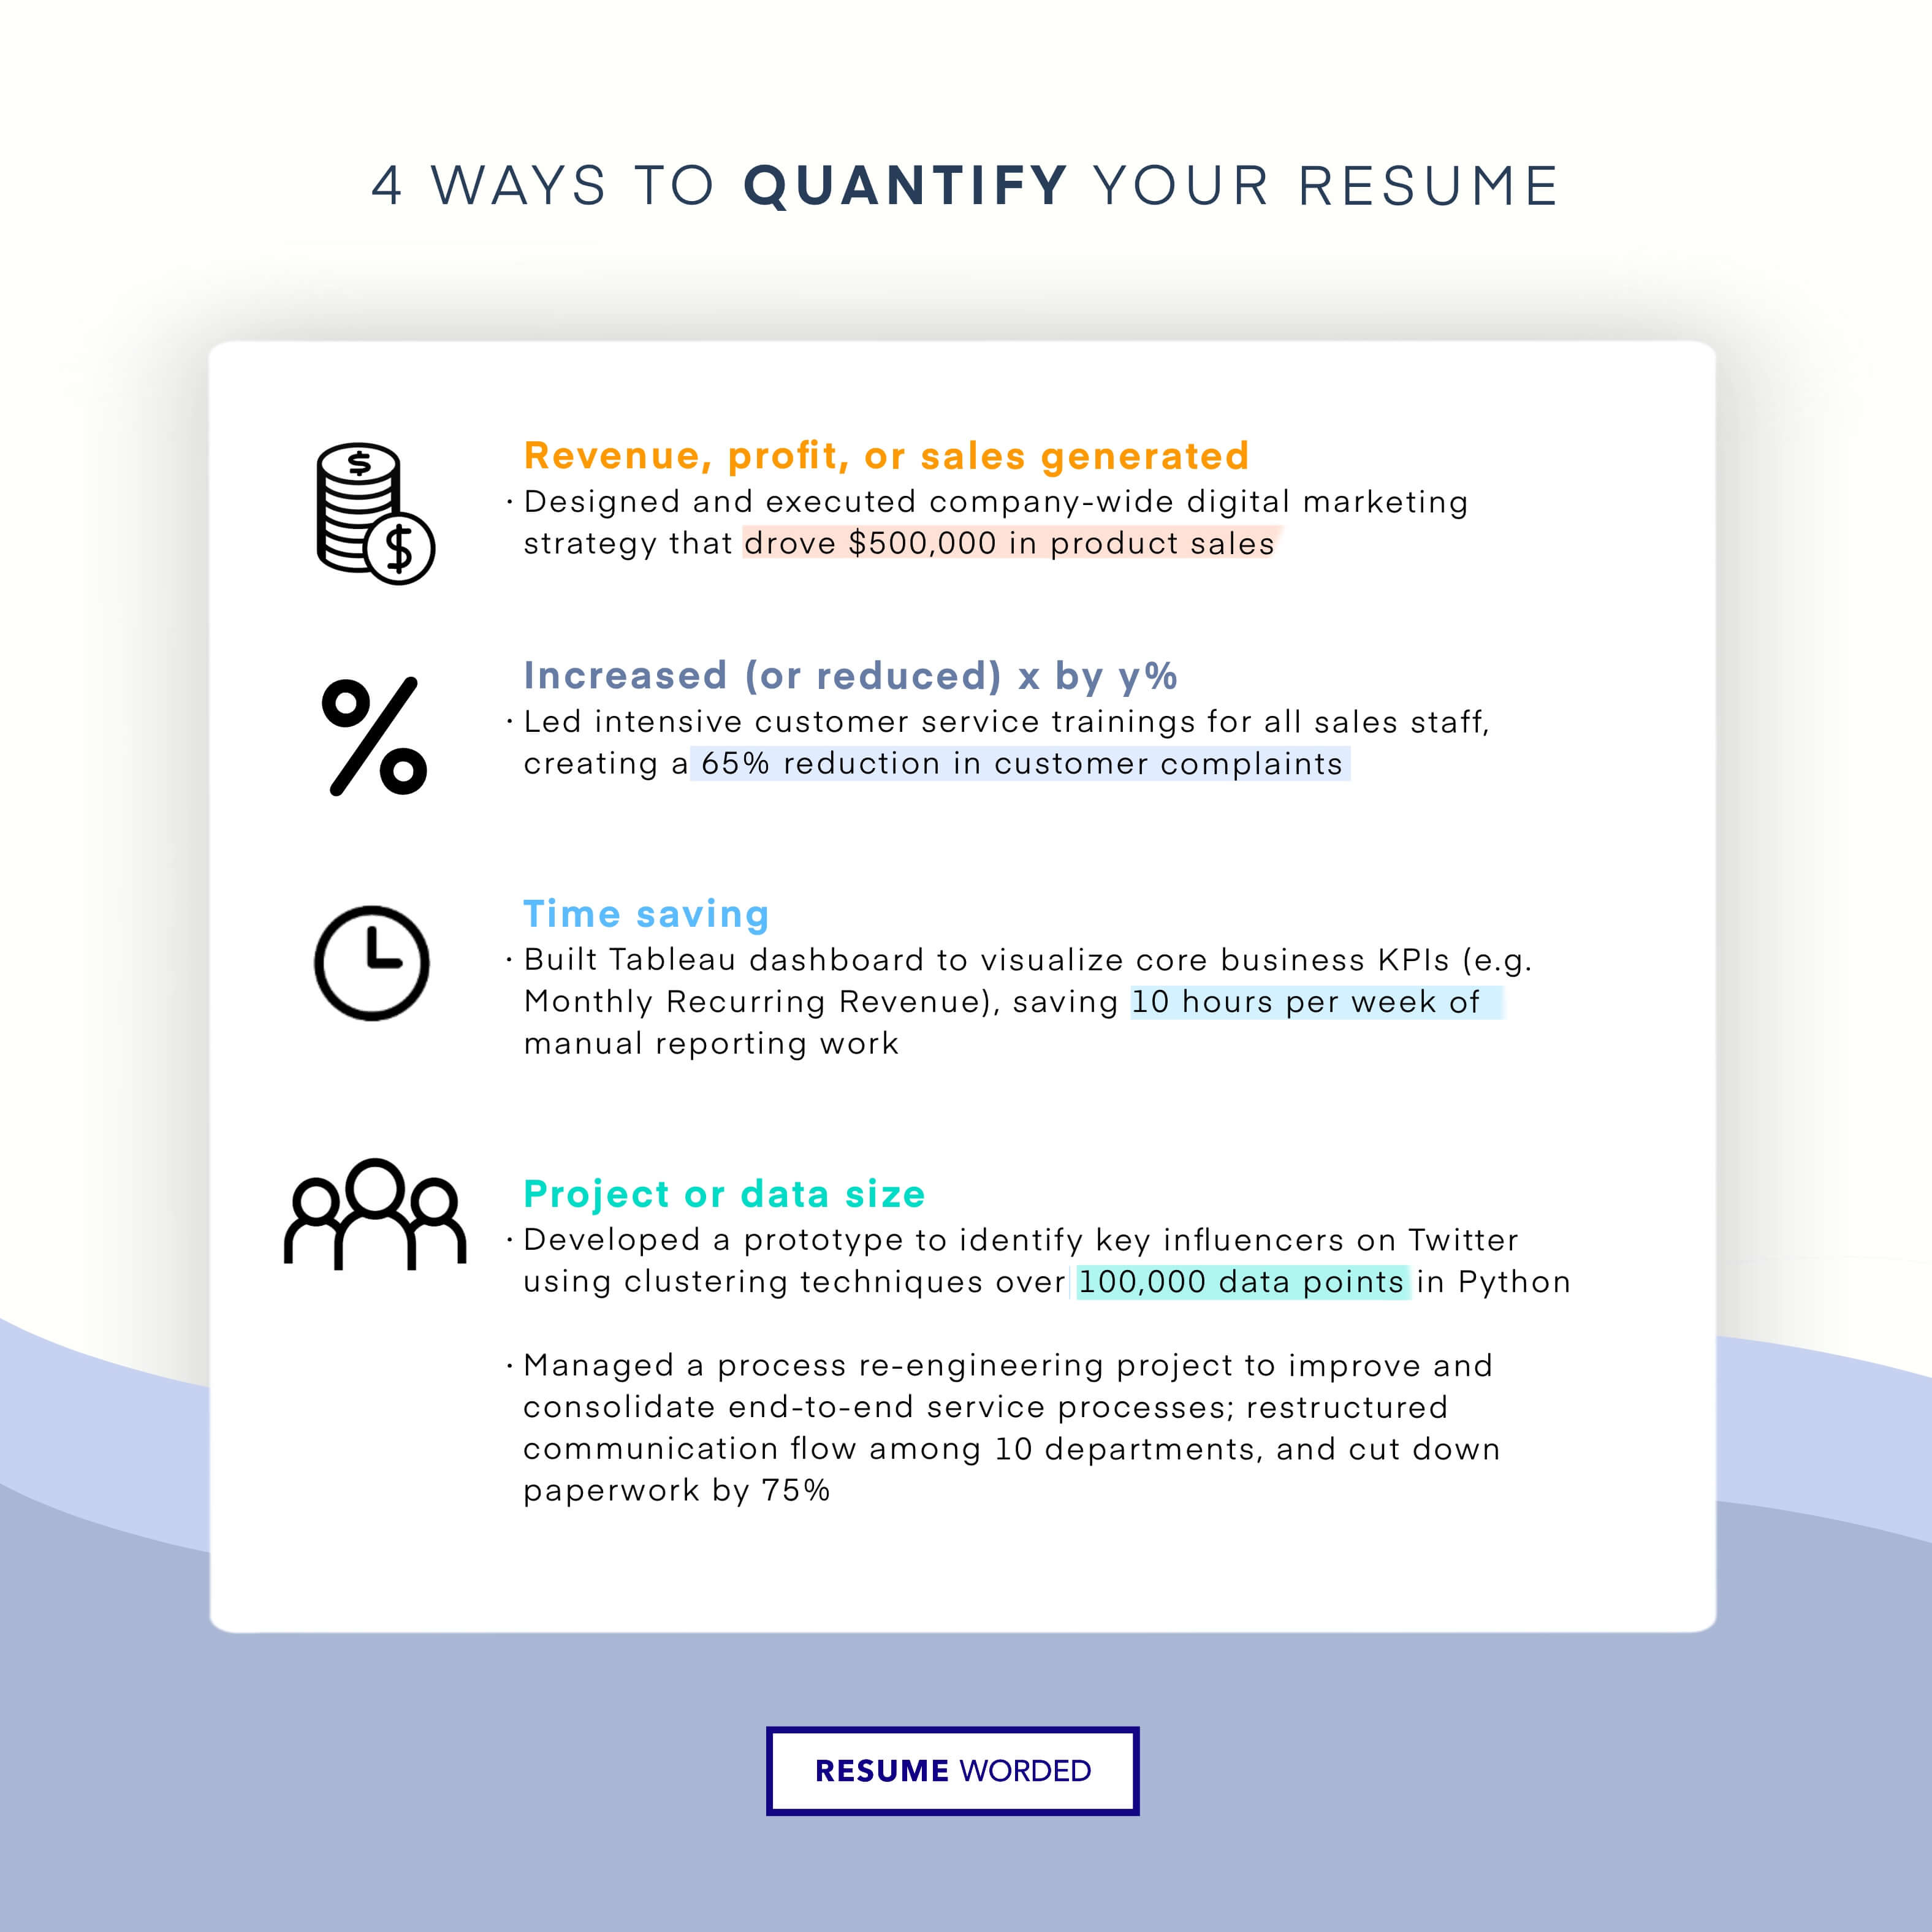 Showcase your achievements with quantifiable results - Category Manager Resume